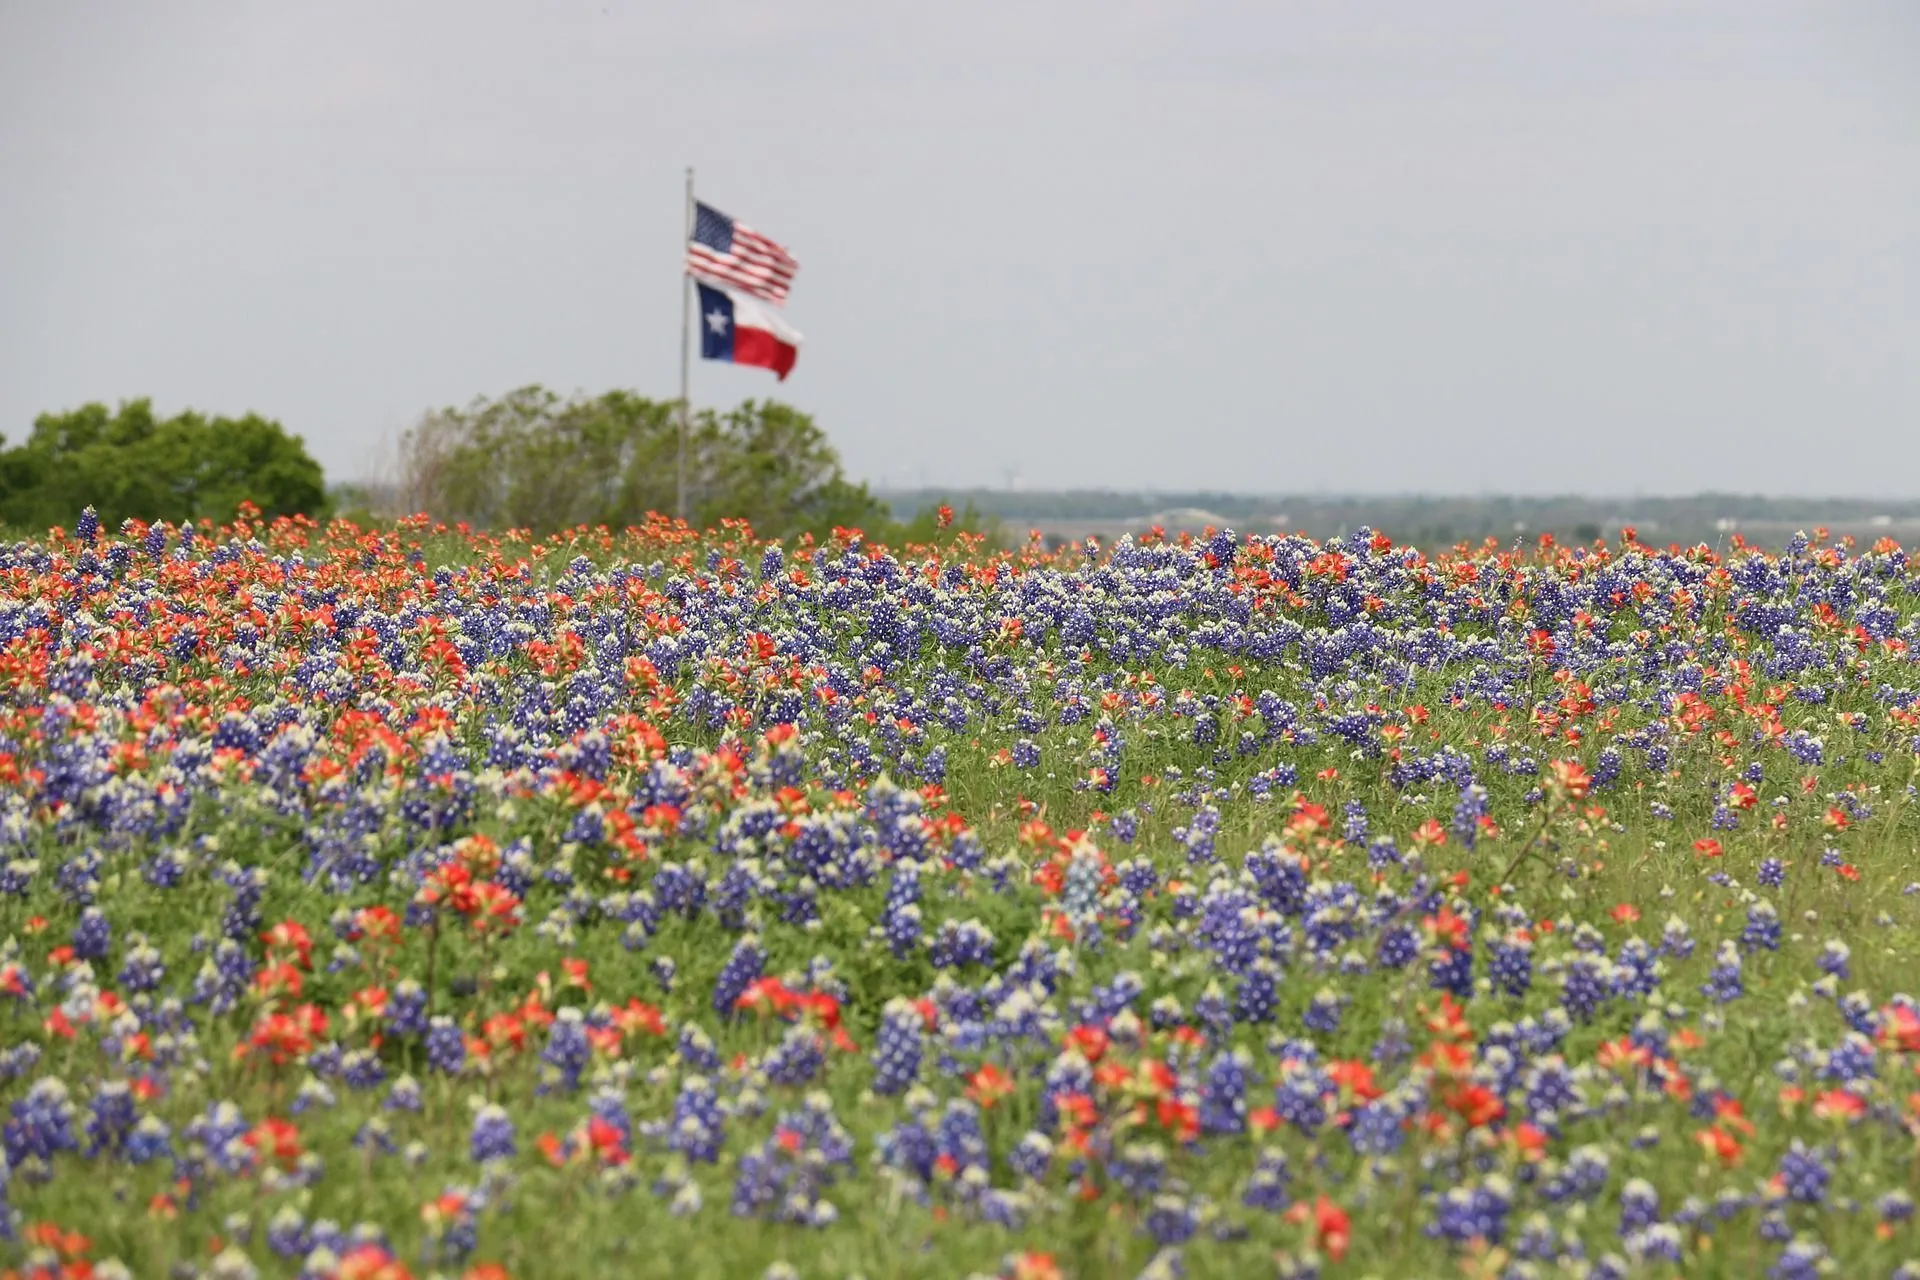 The bluebonnet is the state flower of Texas.